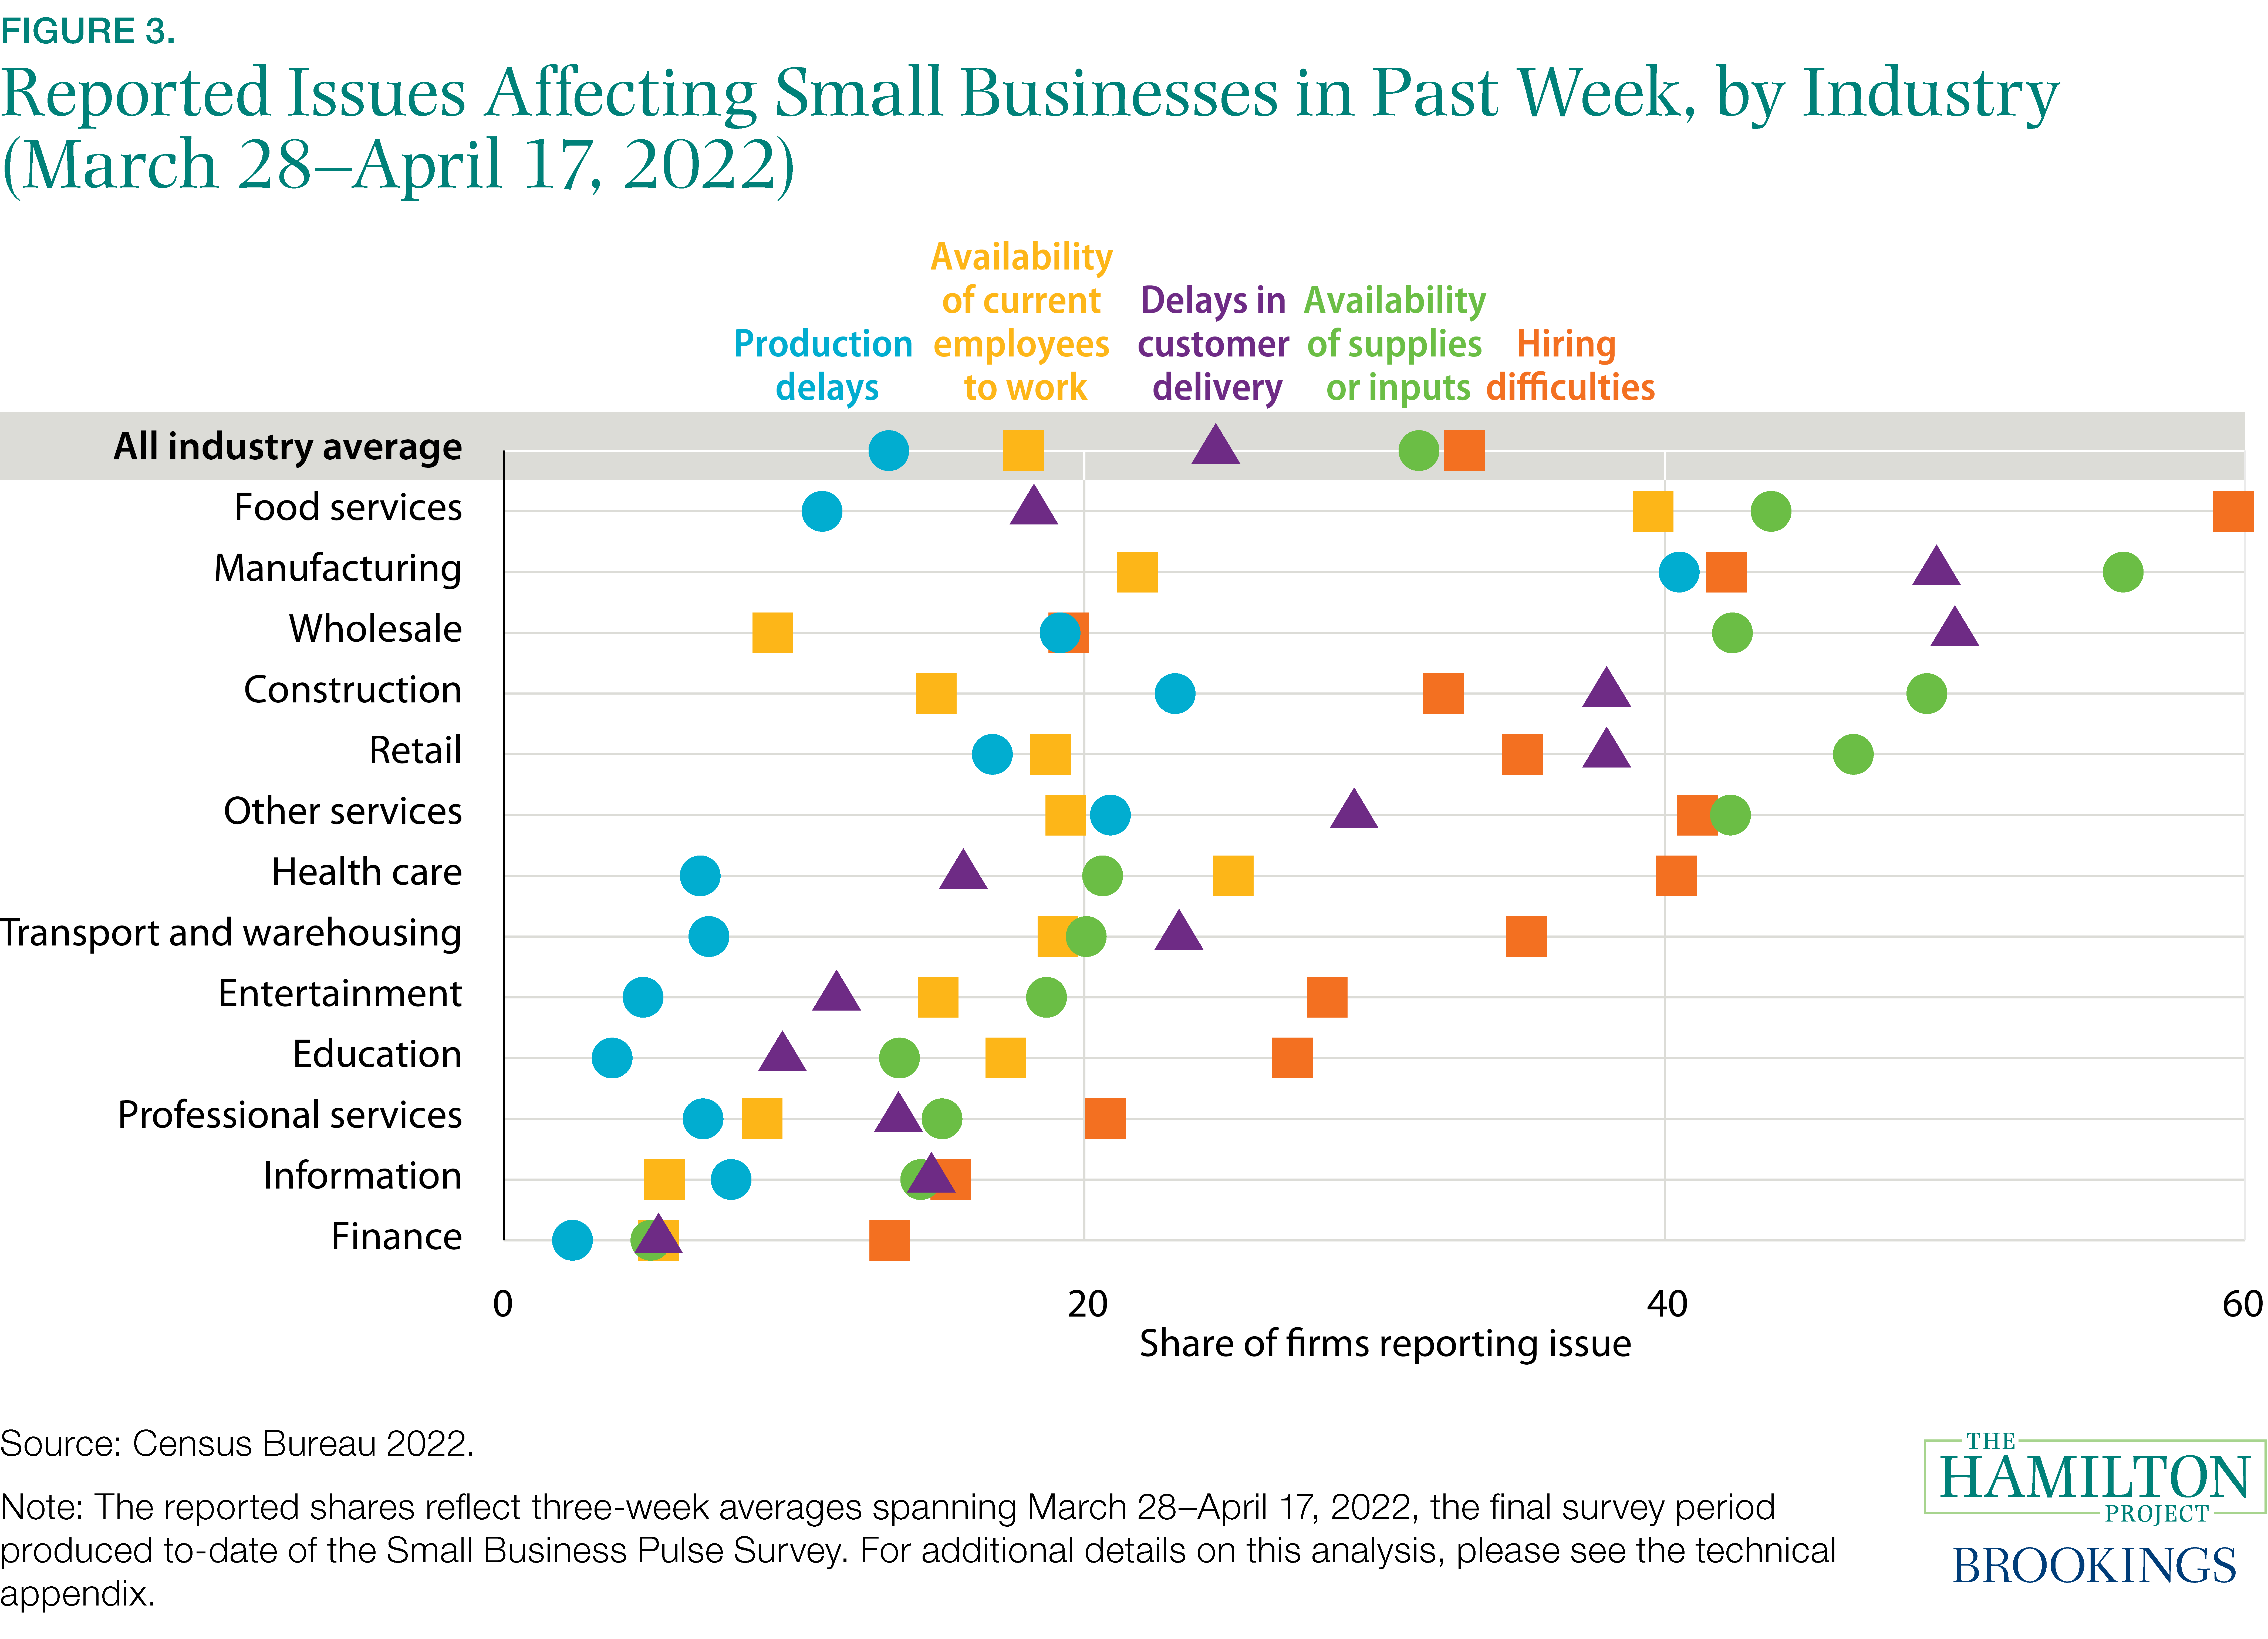 Figure 3. Reported Issues Affecting Small Businesses in Past Week (March 28–April 17, 2022), by Industry 